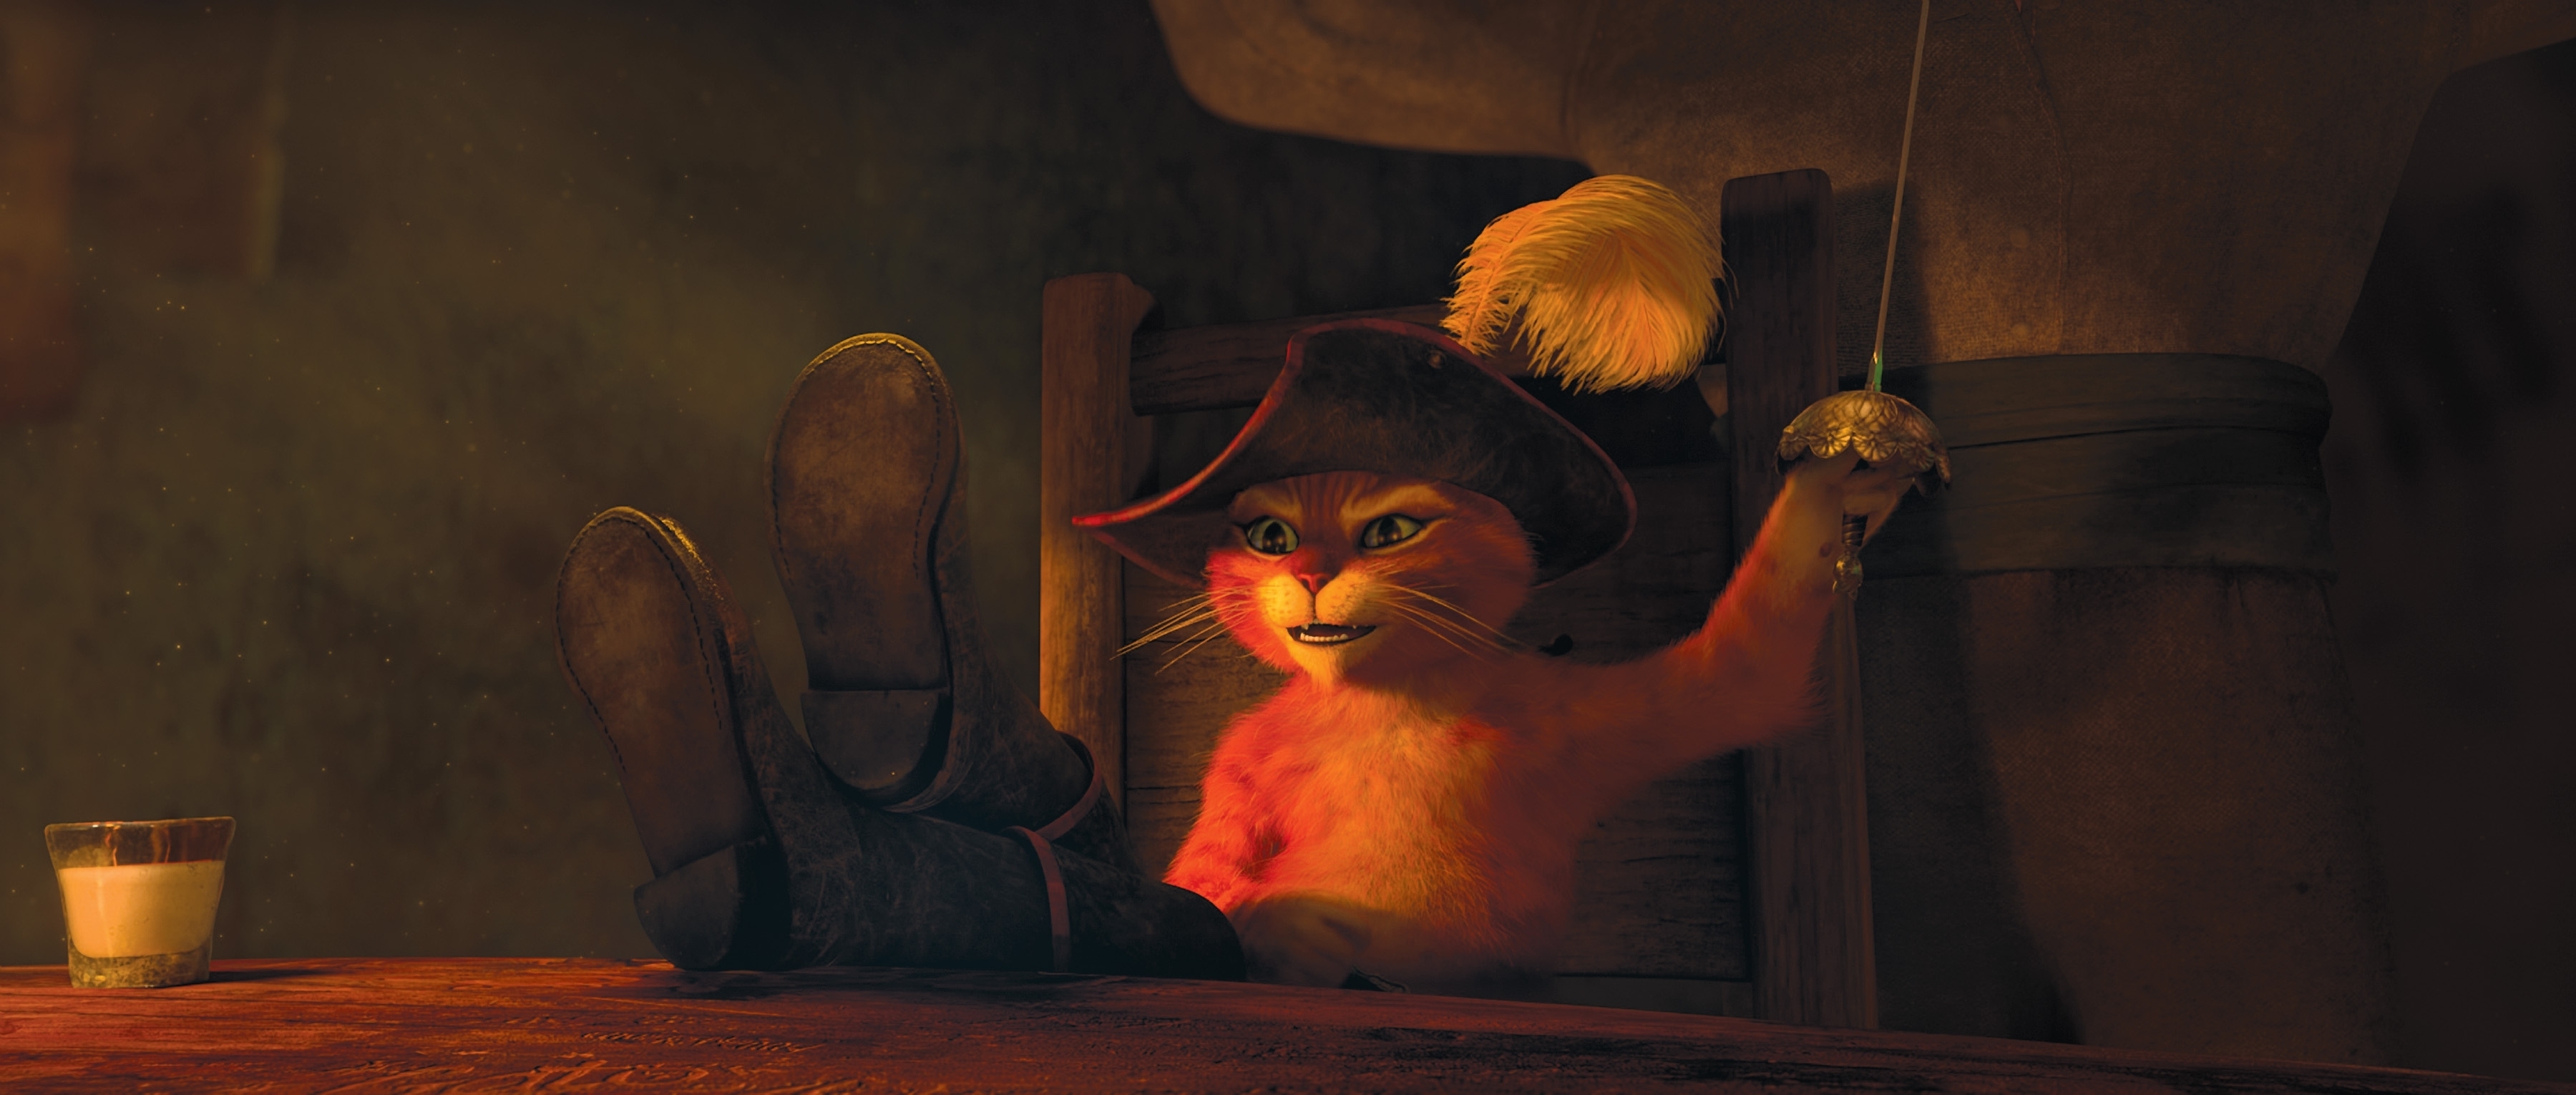 Movie Puss In Boots 3600x1530